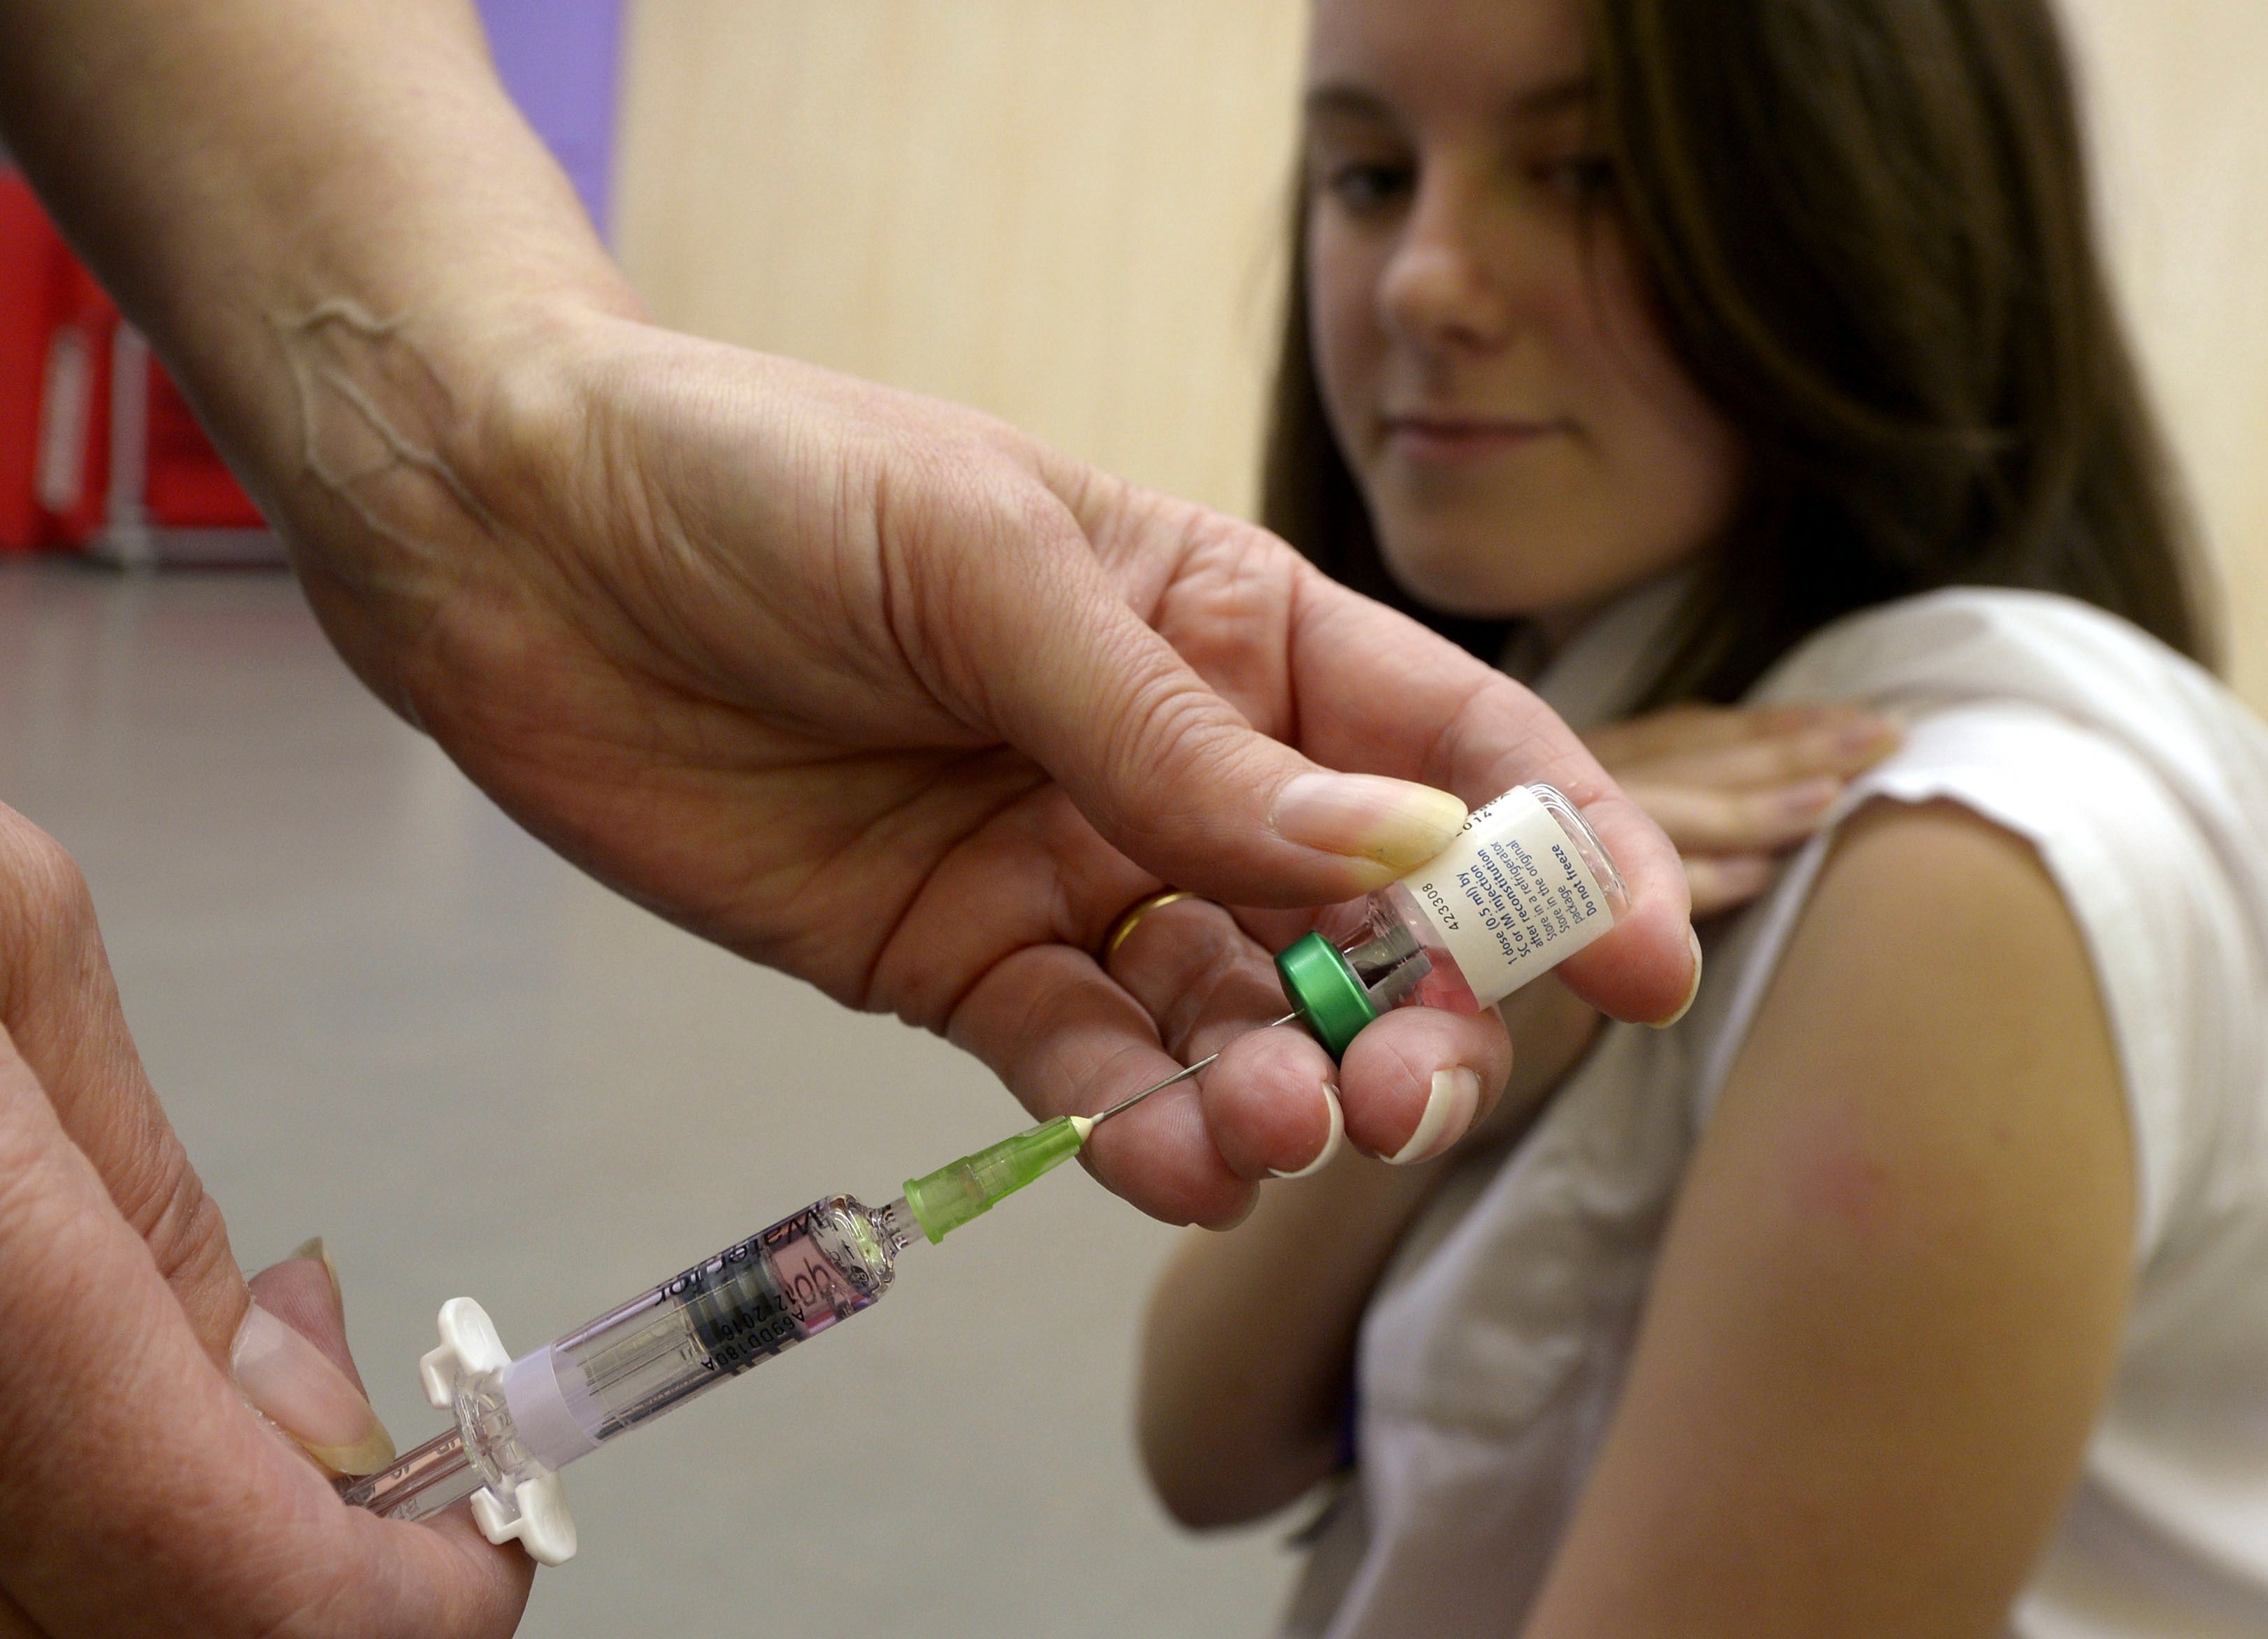 Parents are being urged to get their children vaccinated against measles